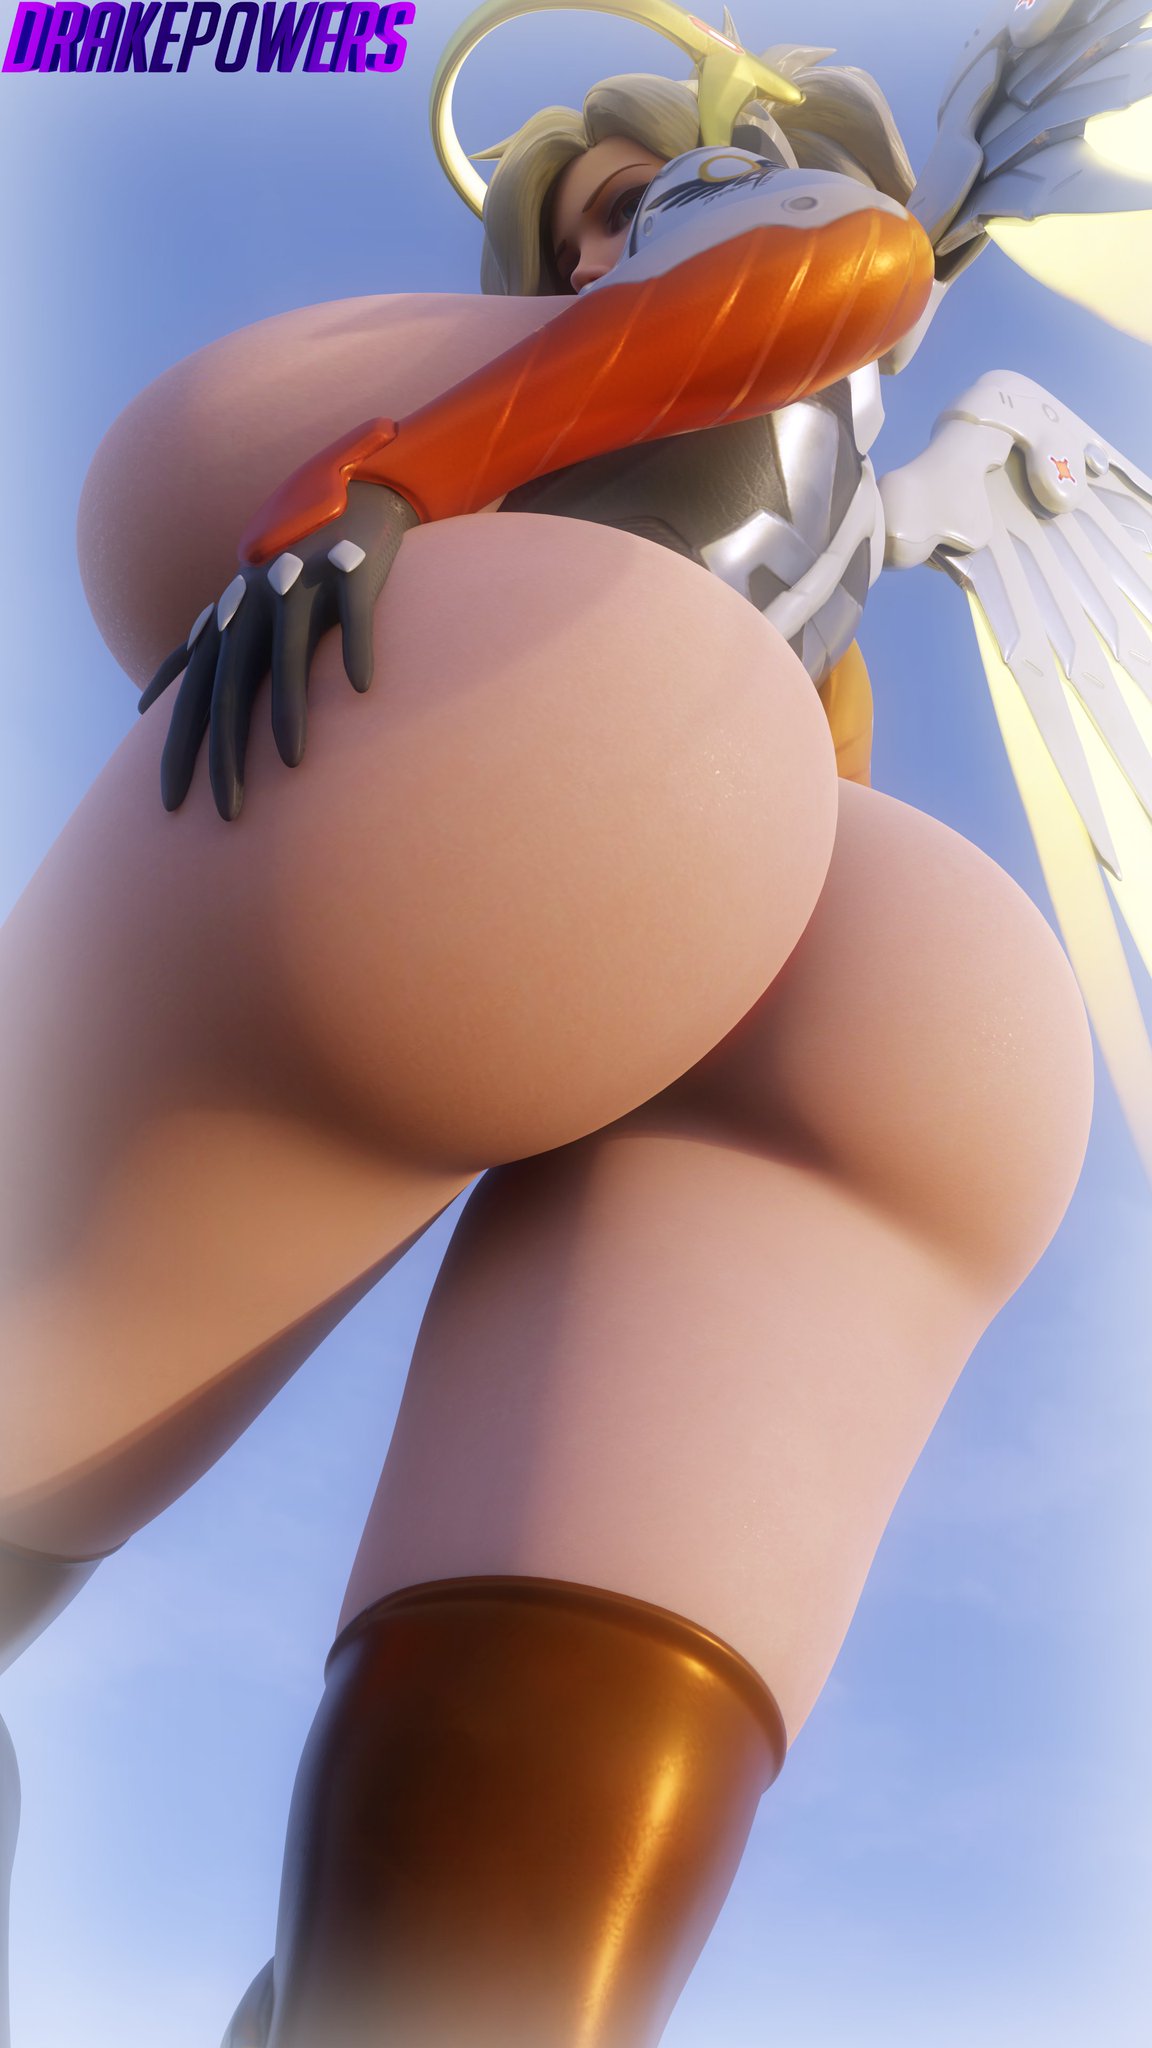 alexandra stanic recommends overwatch mercy rule 34 pic